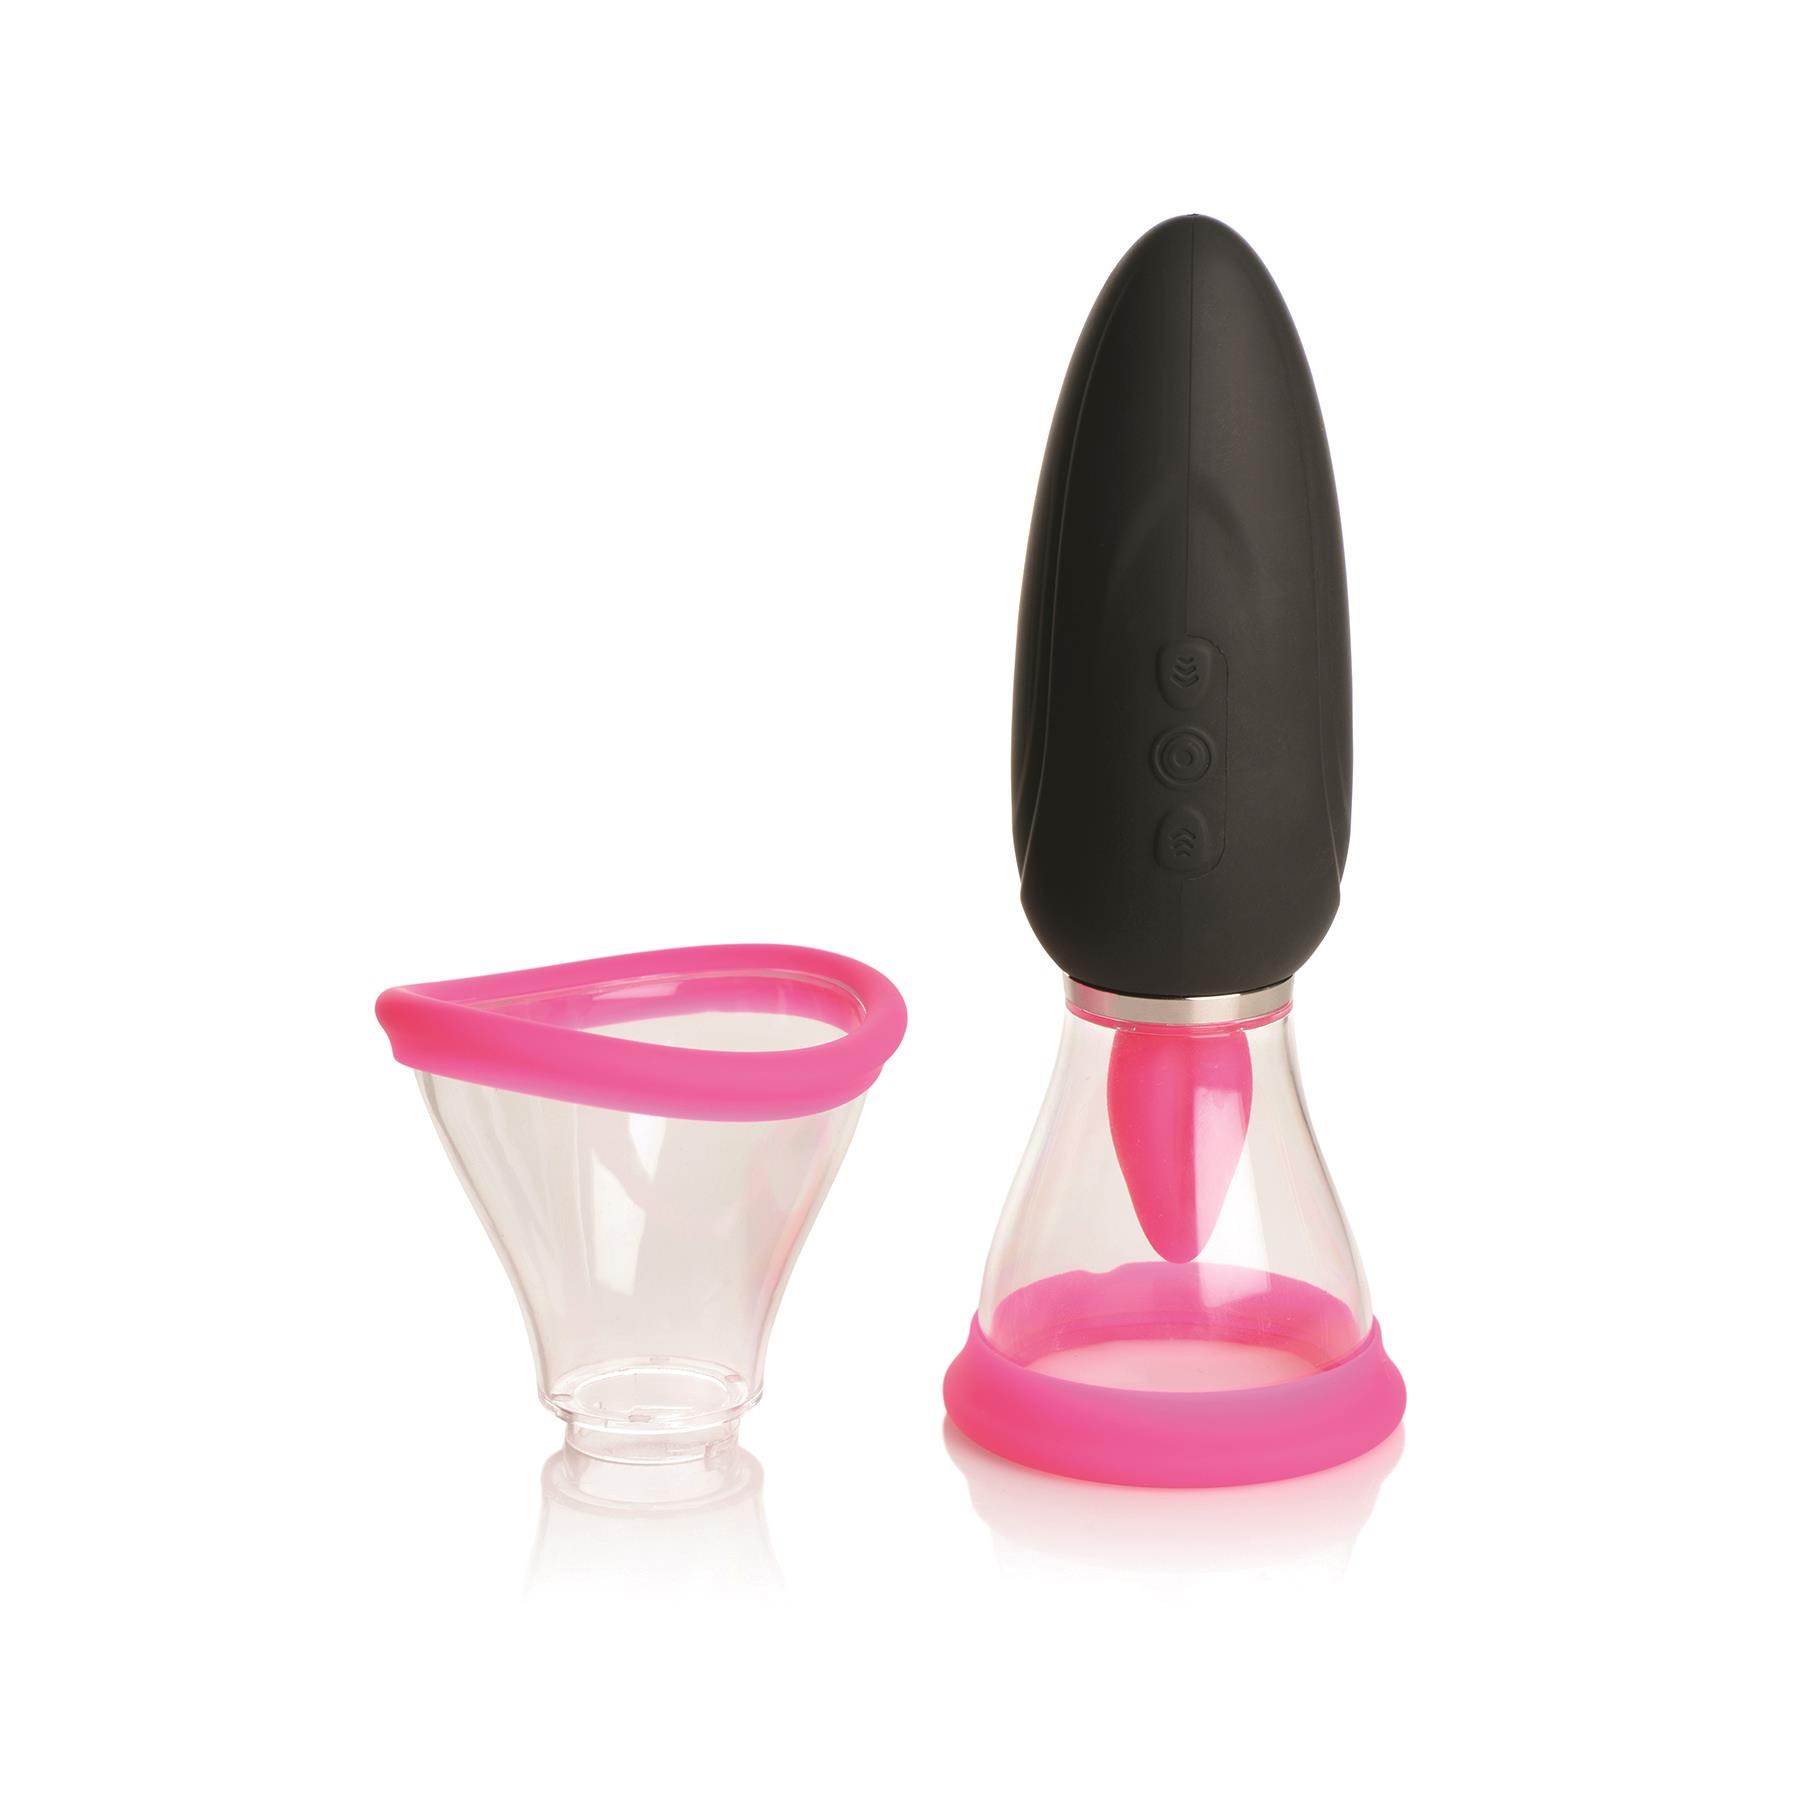 Shegasm Lickgasm Mini Pussy Pump - Product Shot With Both Cup Sizes #1